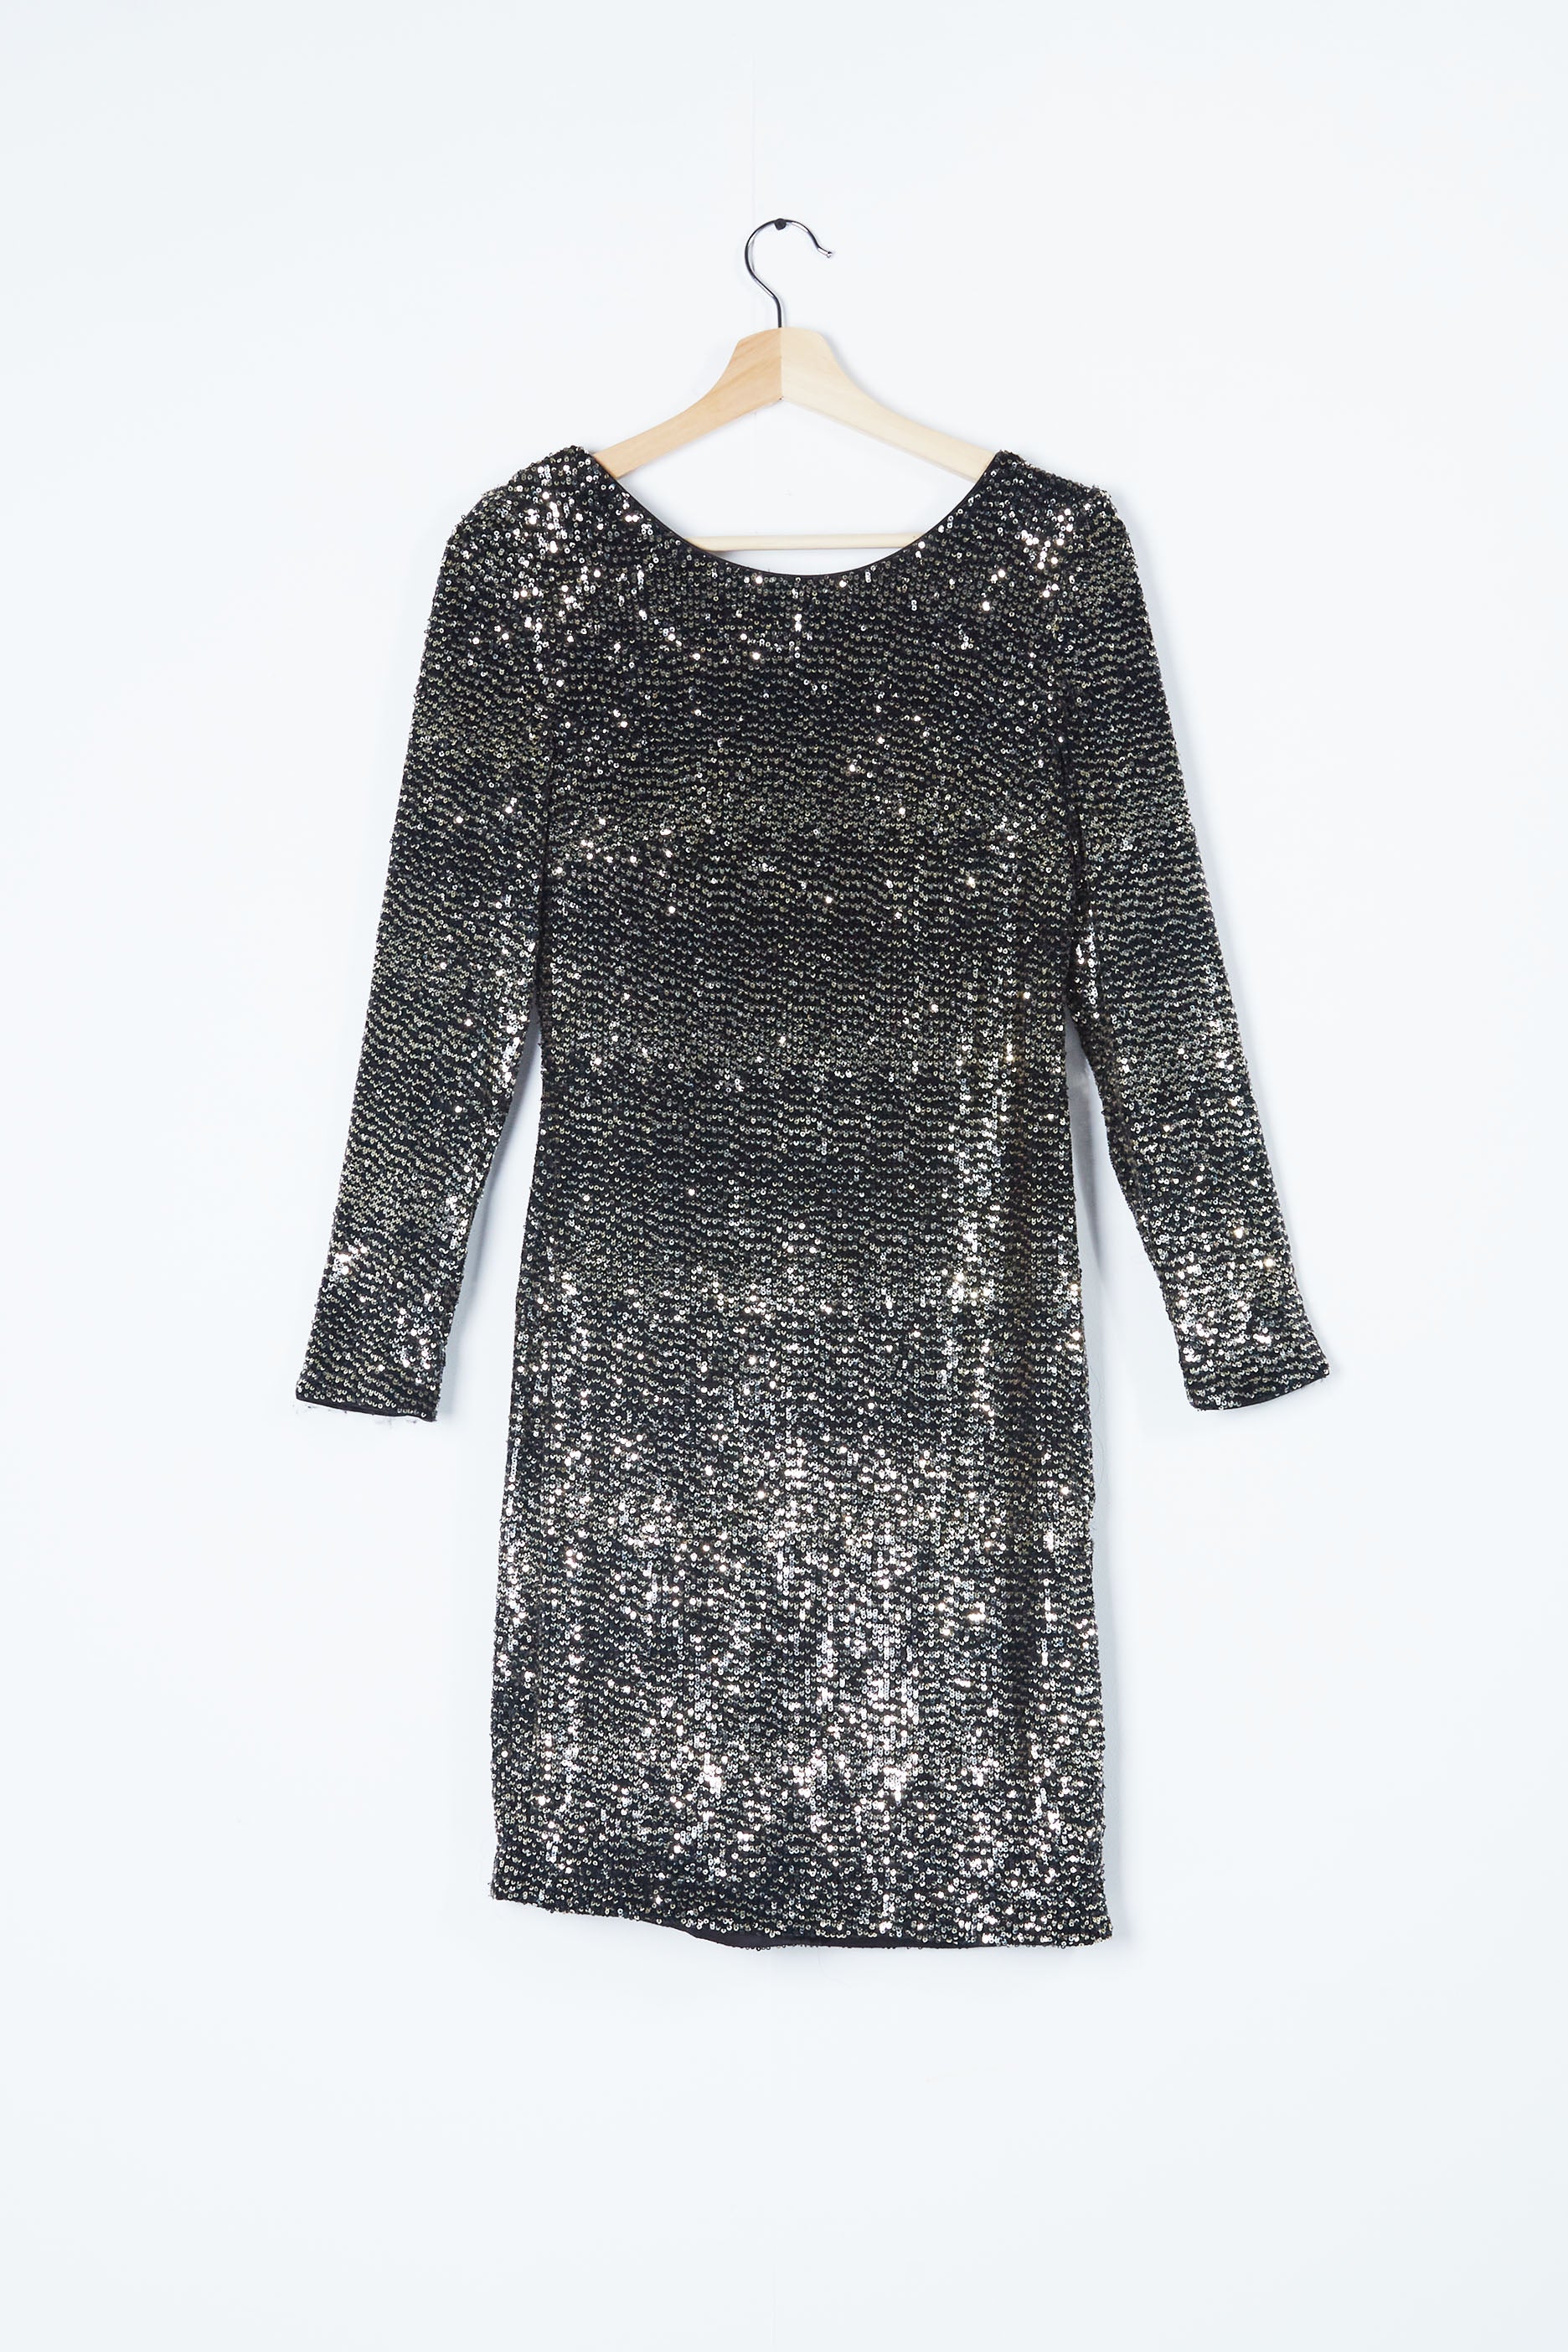 Black/Silver Sequin Party Dress with Open Back (Medium)